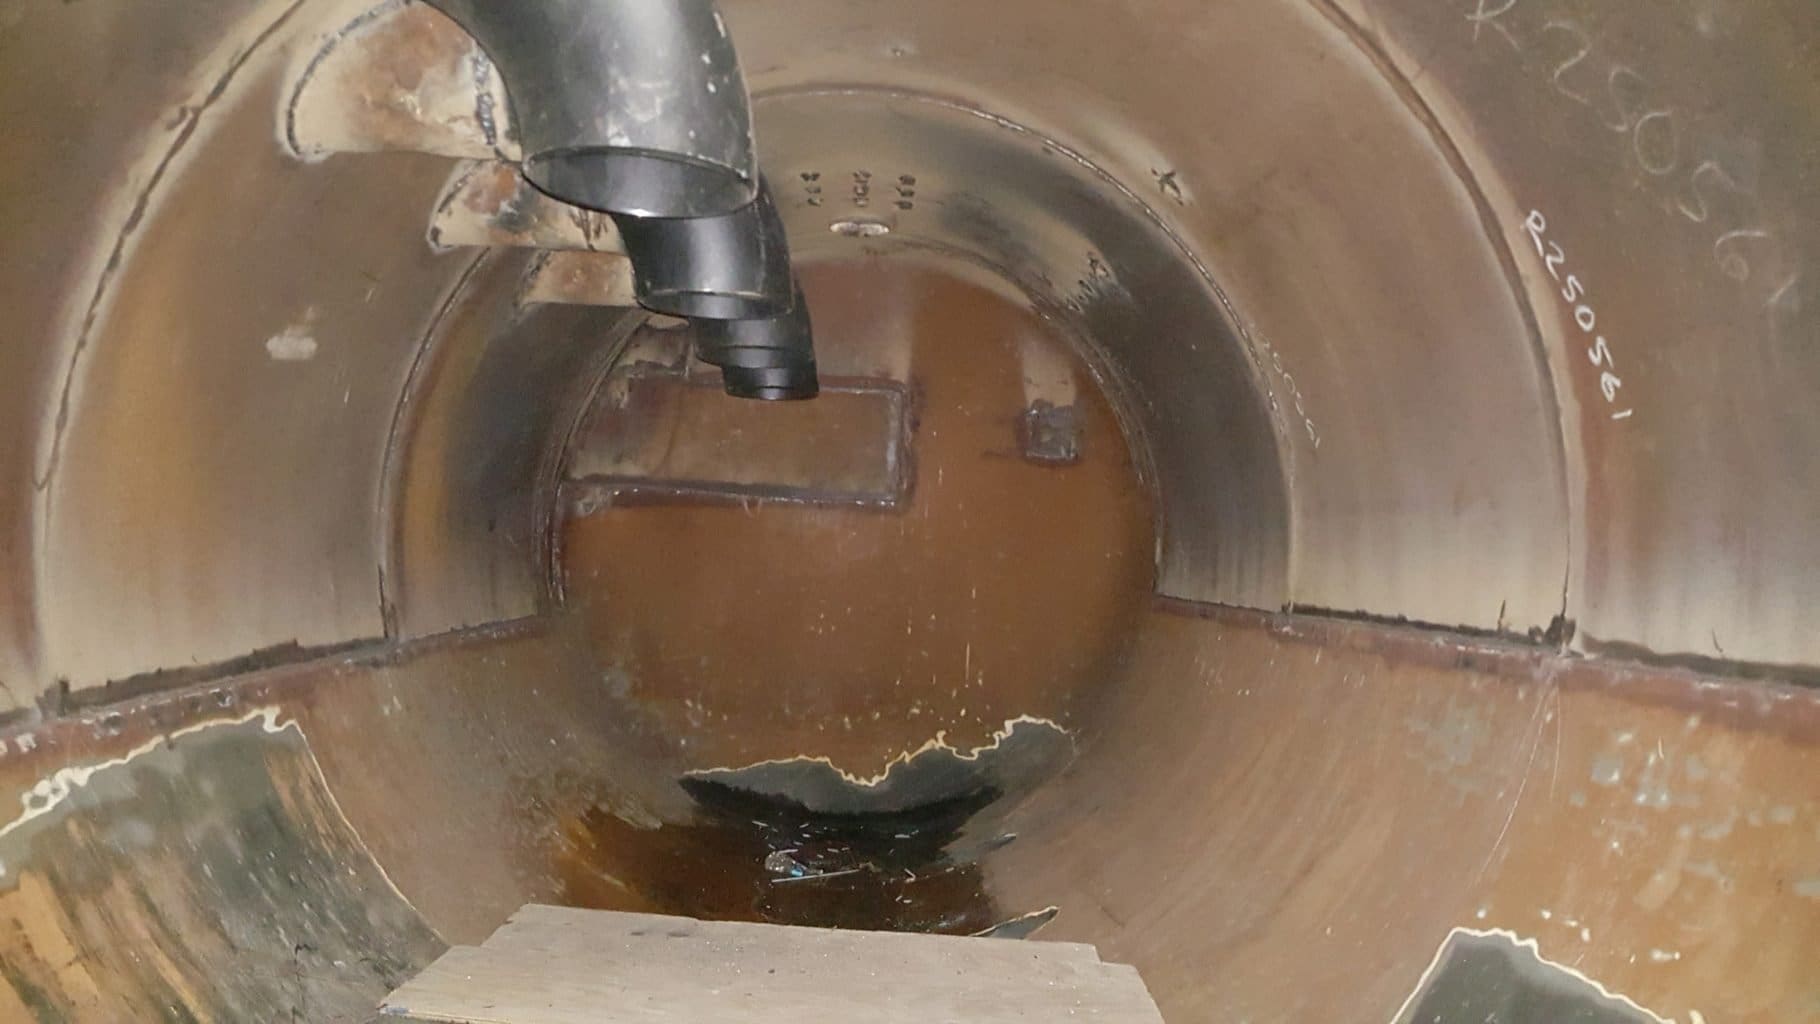 Collection Tank Inspections - Flovac Vacuum Sewerage Systems